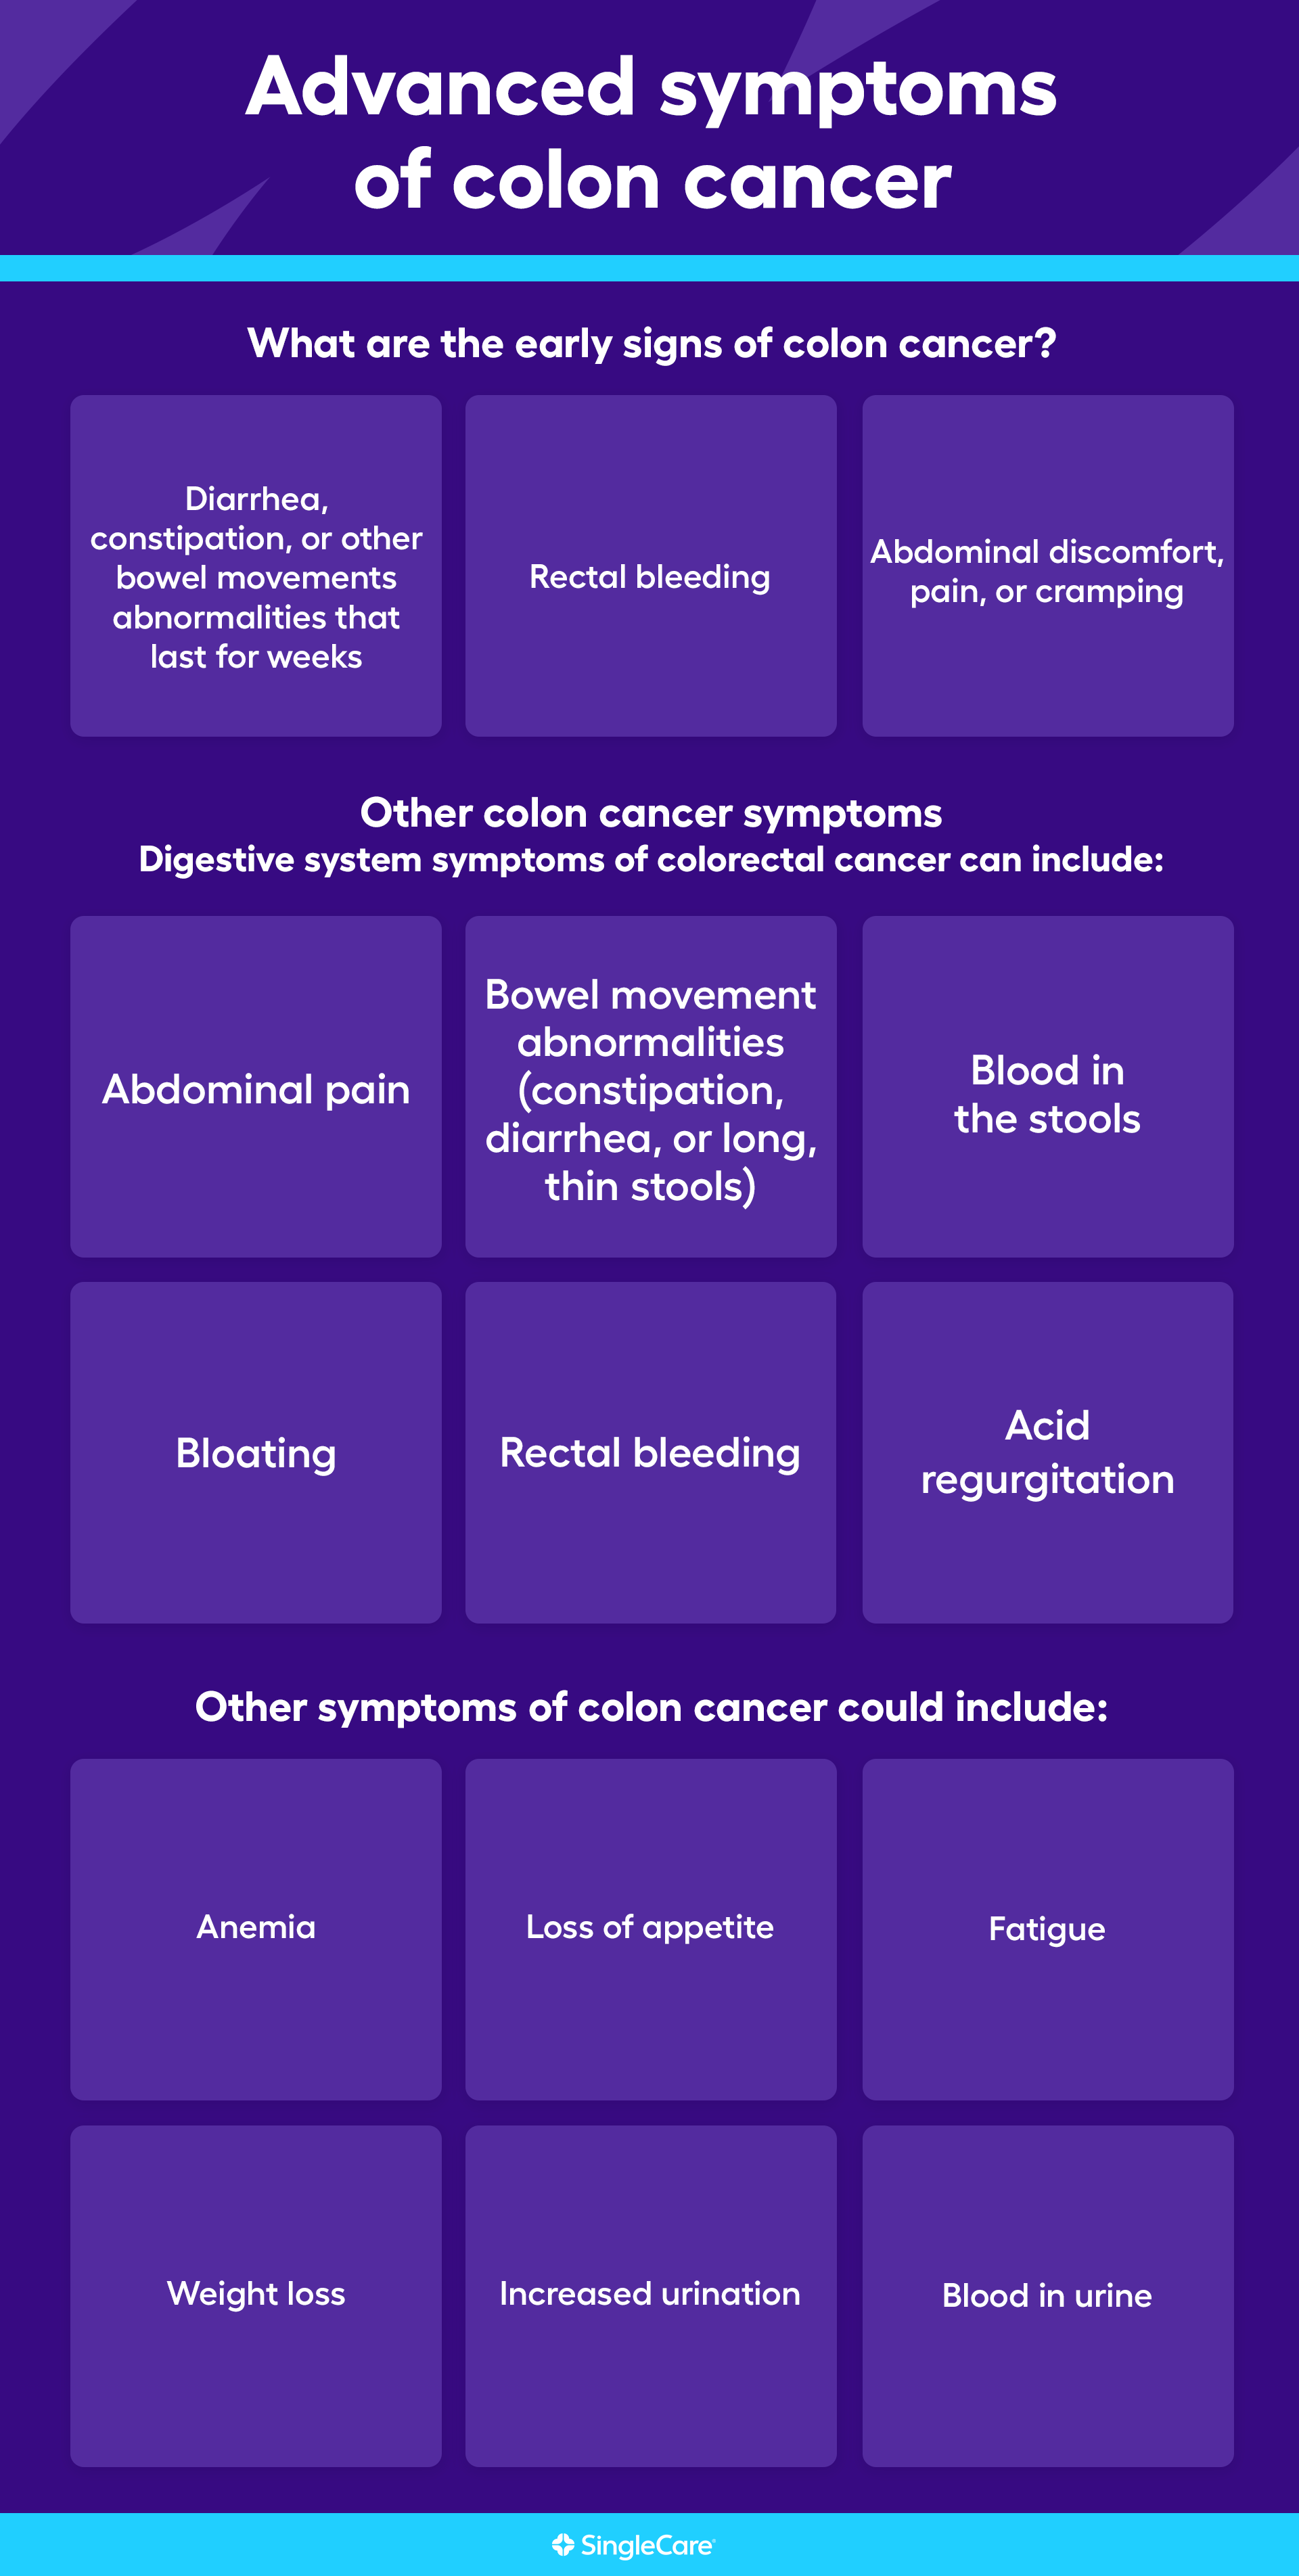 What are the symptoms of colon cancer?